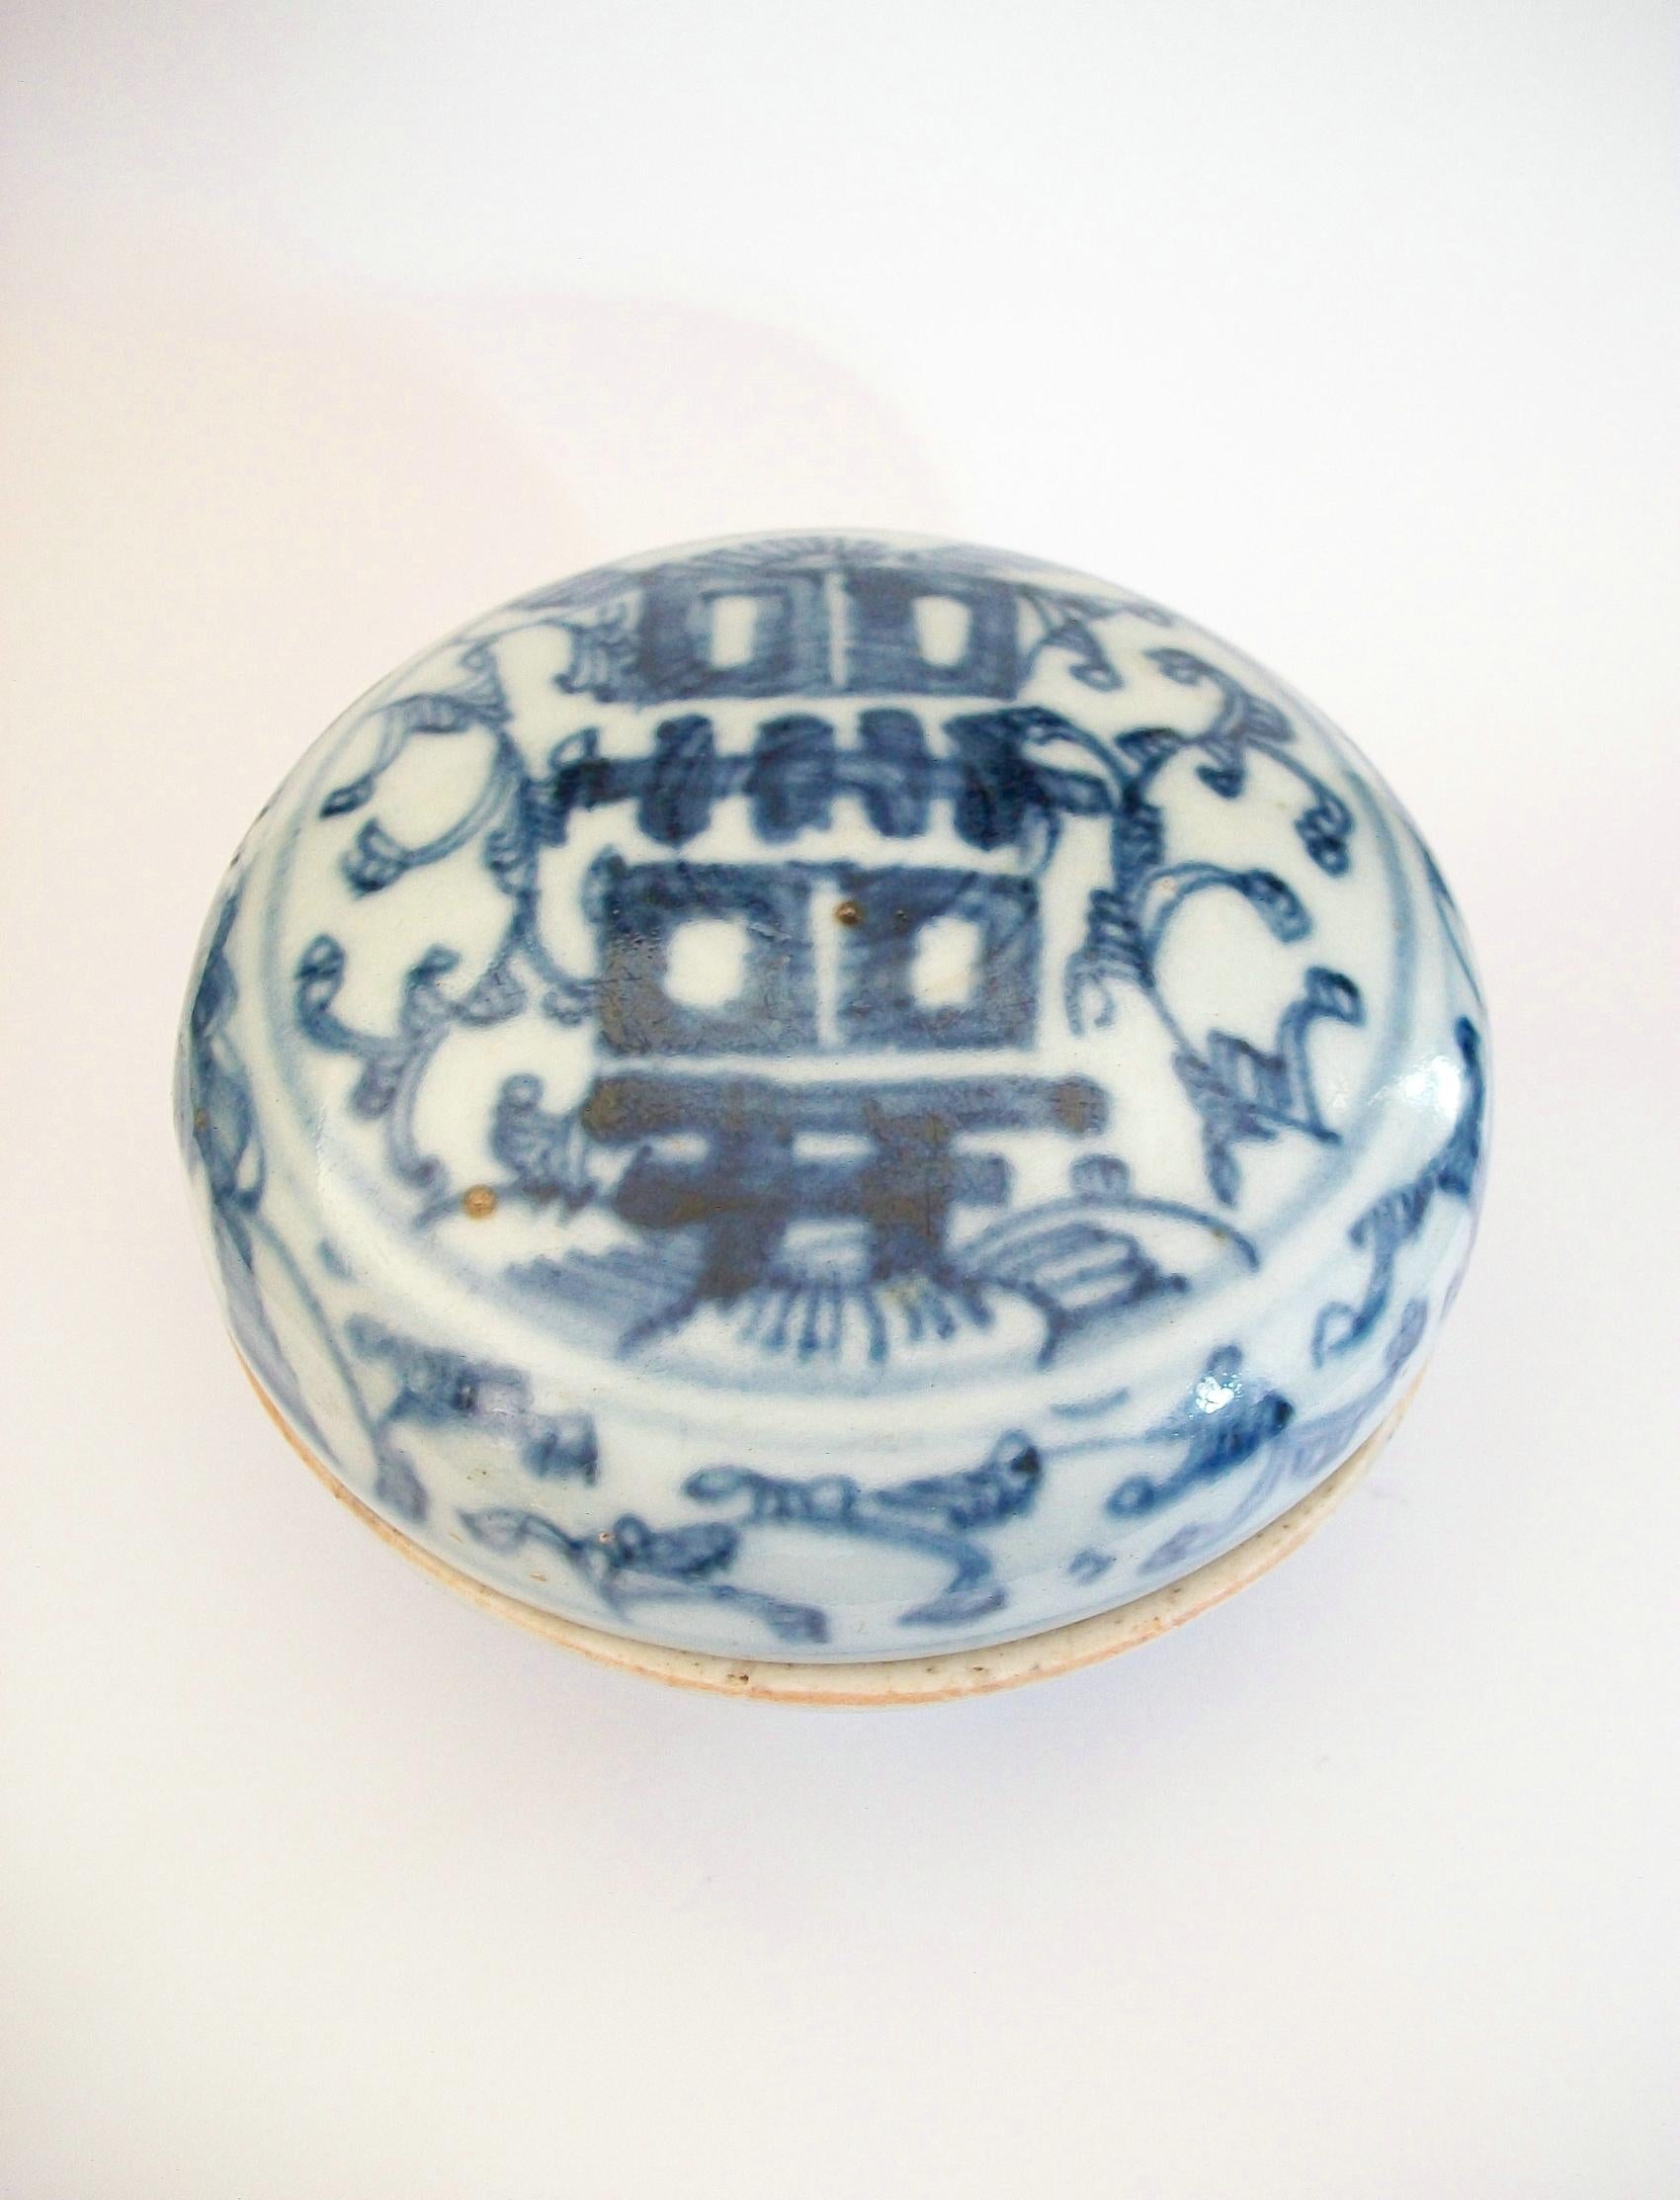 Antique Qing Dynasty Blue & White porcelain box with cover - hand painted with the double happiness symbol to the top and meandering vines to the sides - unsigned - China - late 19th century.

Good antique condition - old minor edge chip (as